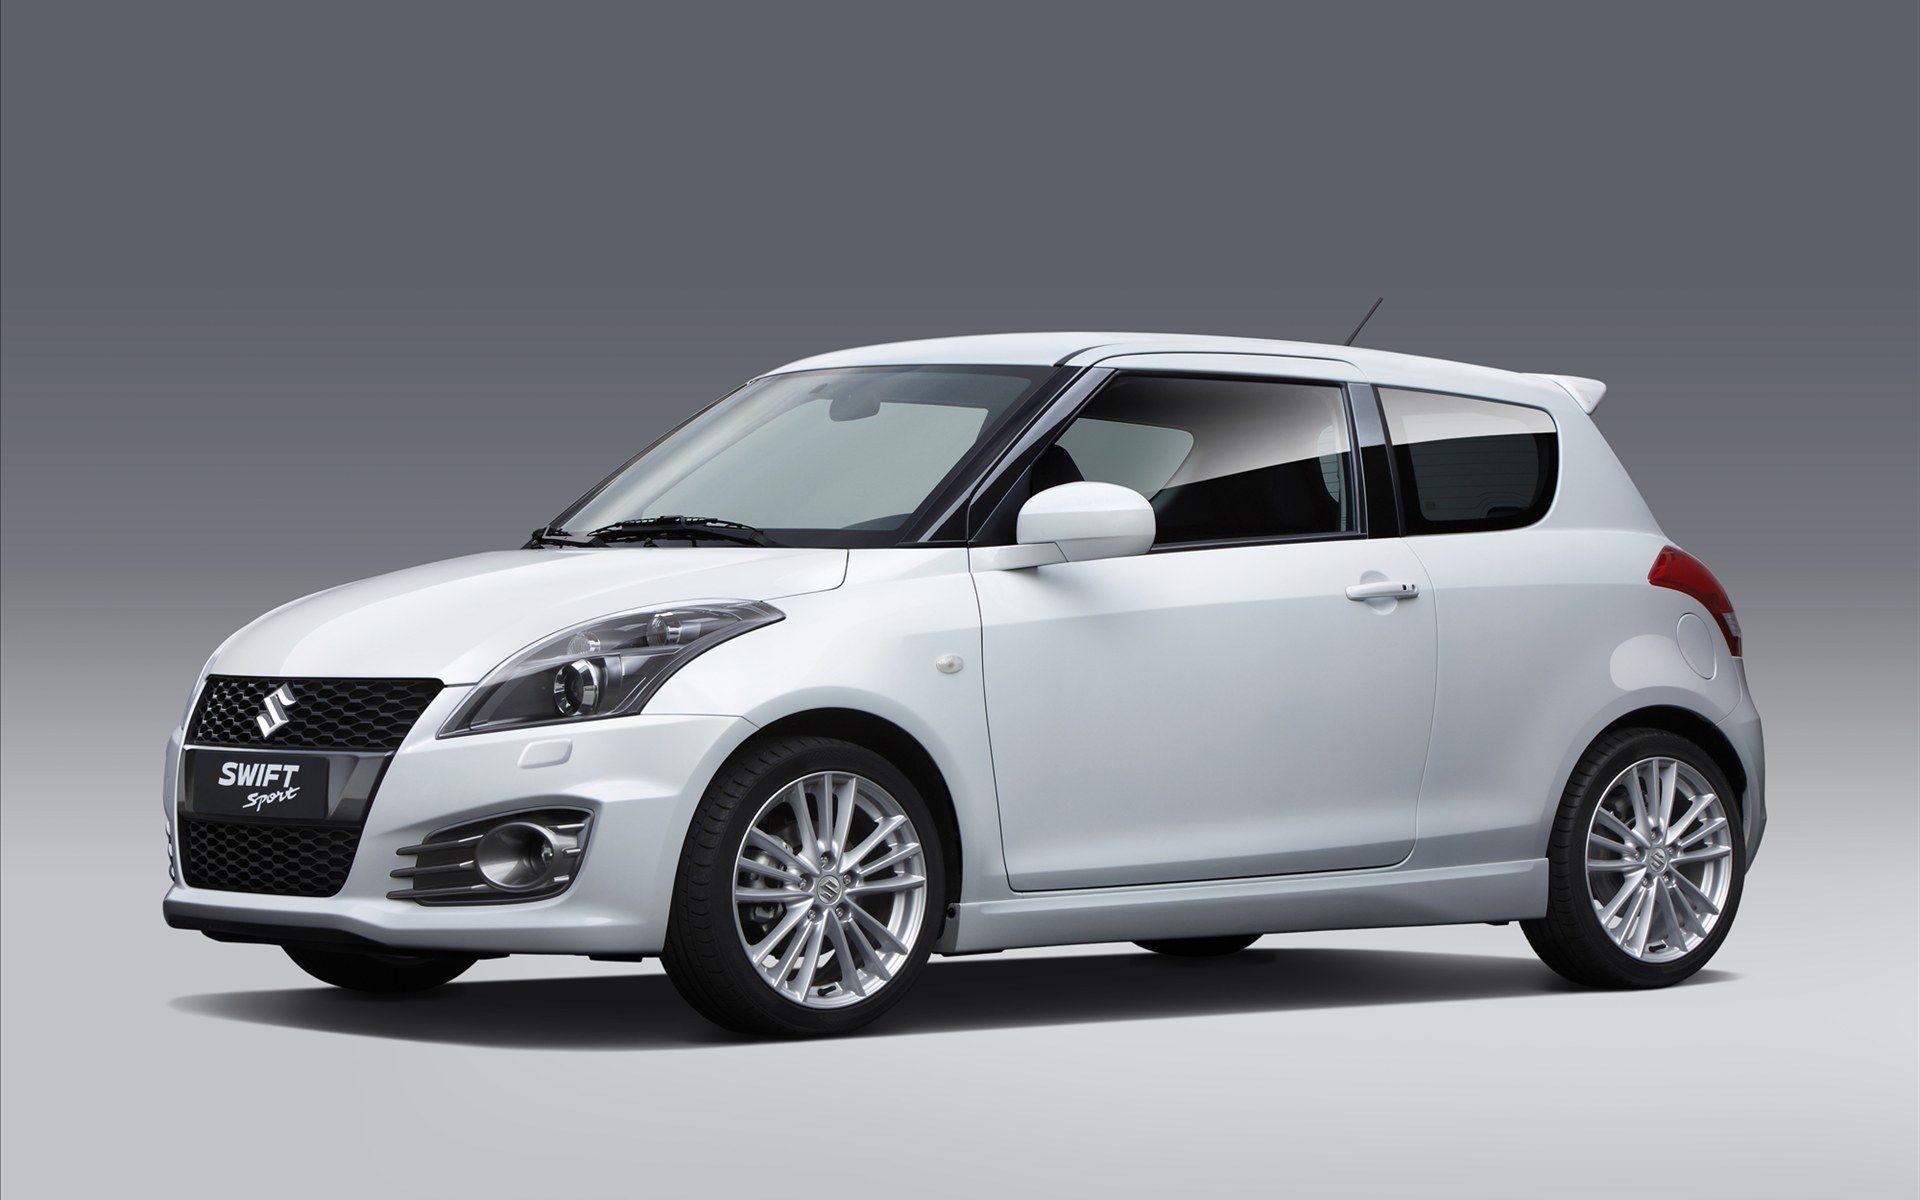 Beautiful car Suzuki Swift in Moscow wallpaper and image